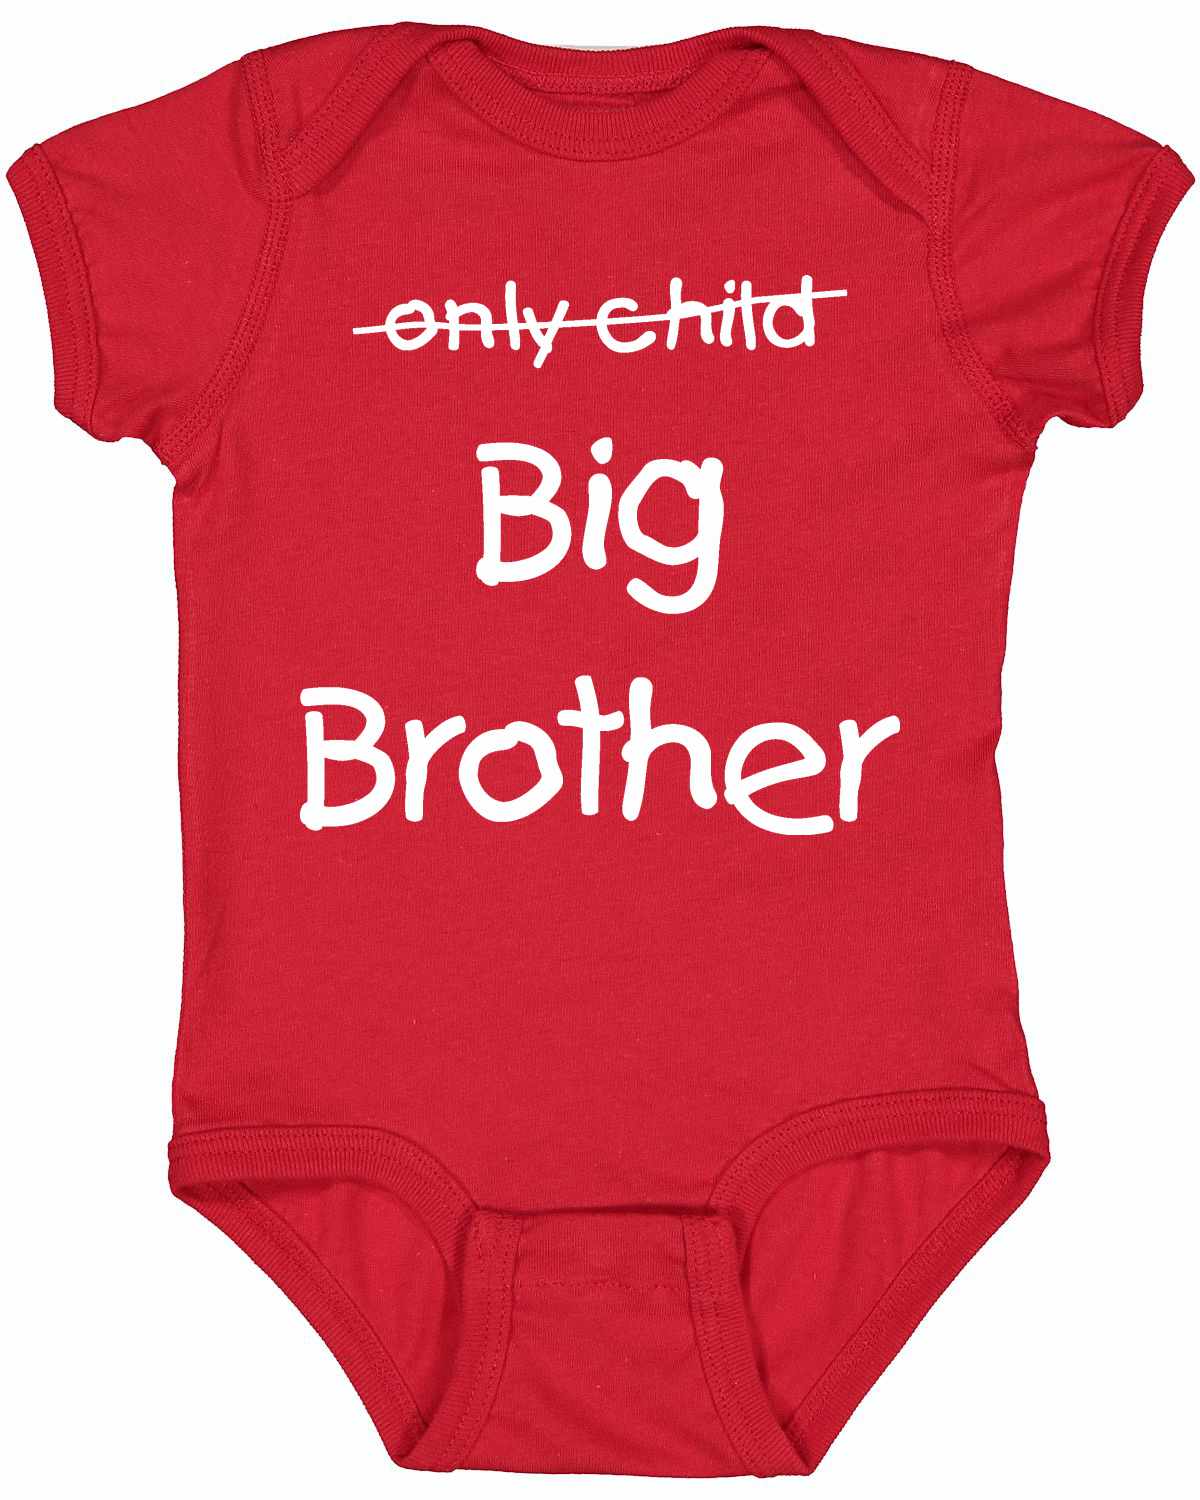 Only Child BIG BROTHER on Infant BodySuit (#965-10)